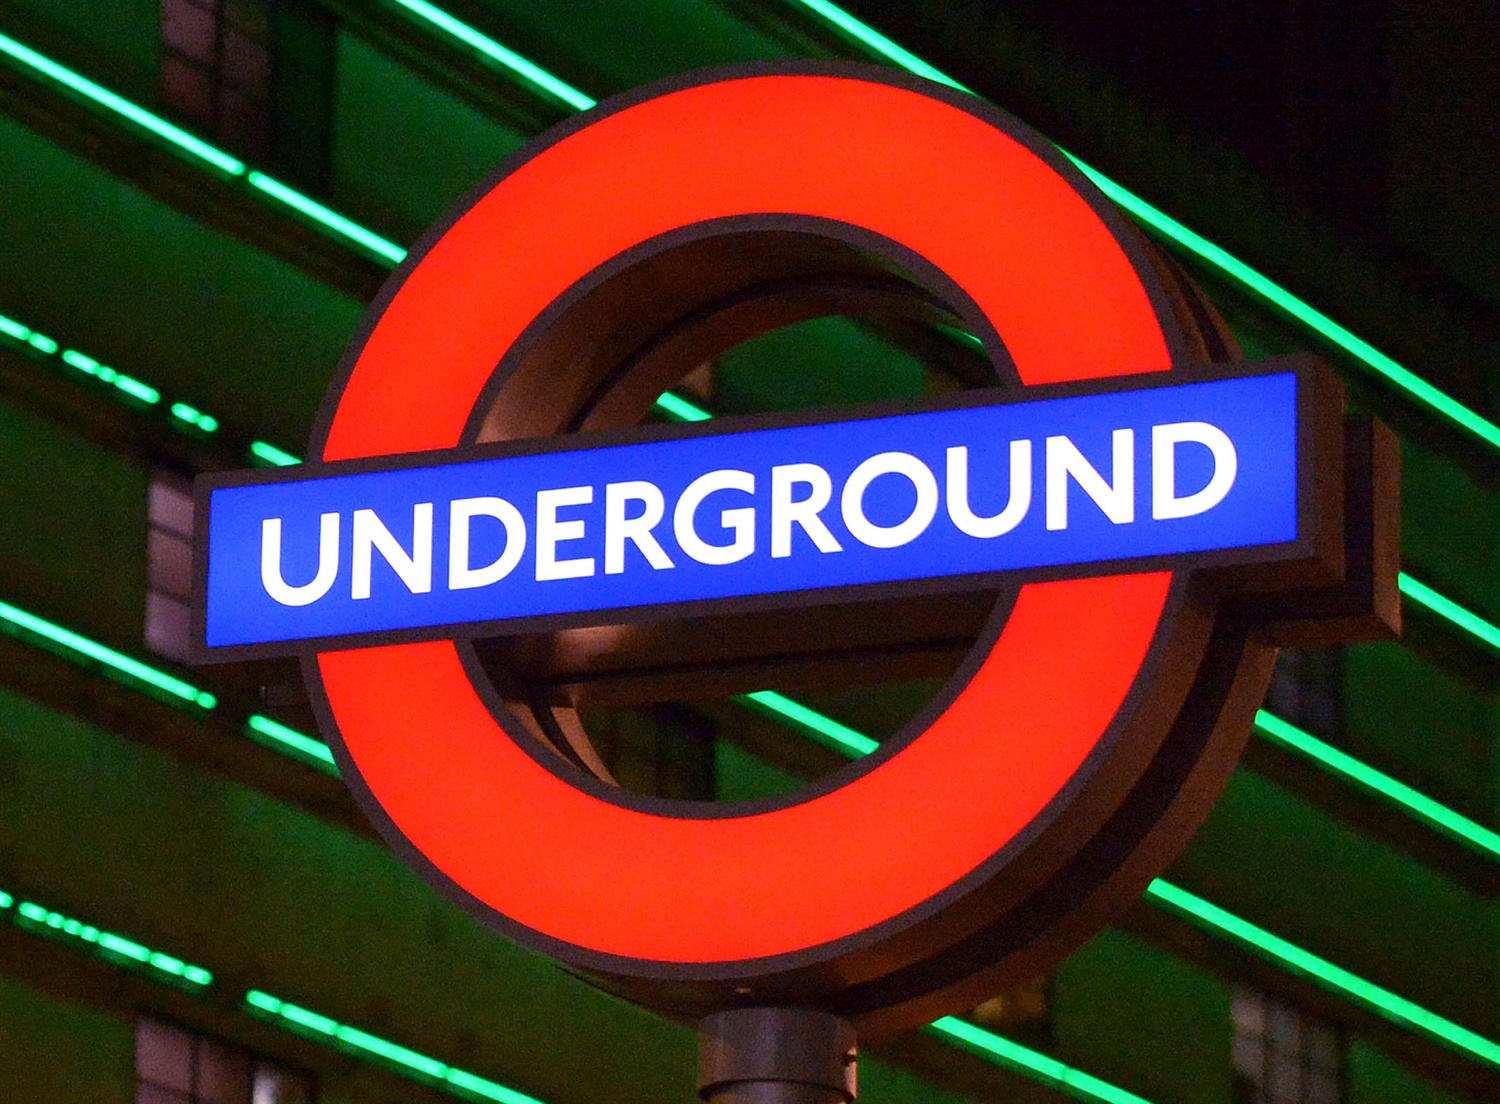 TfL shelves plans for Tube upgrades as financial woes revealed 